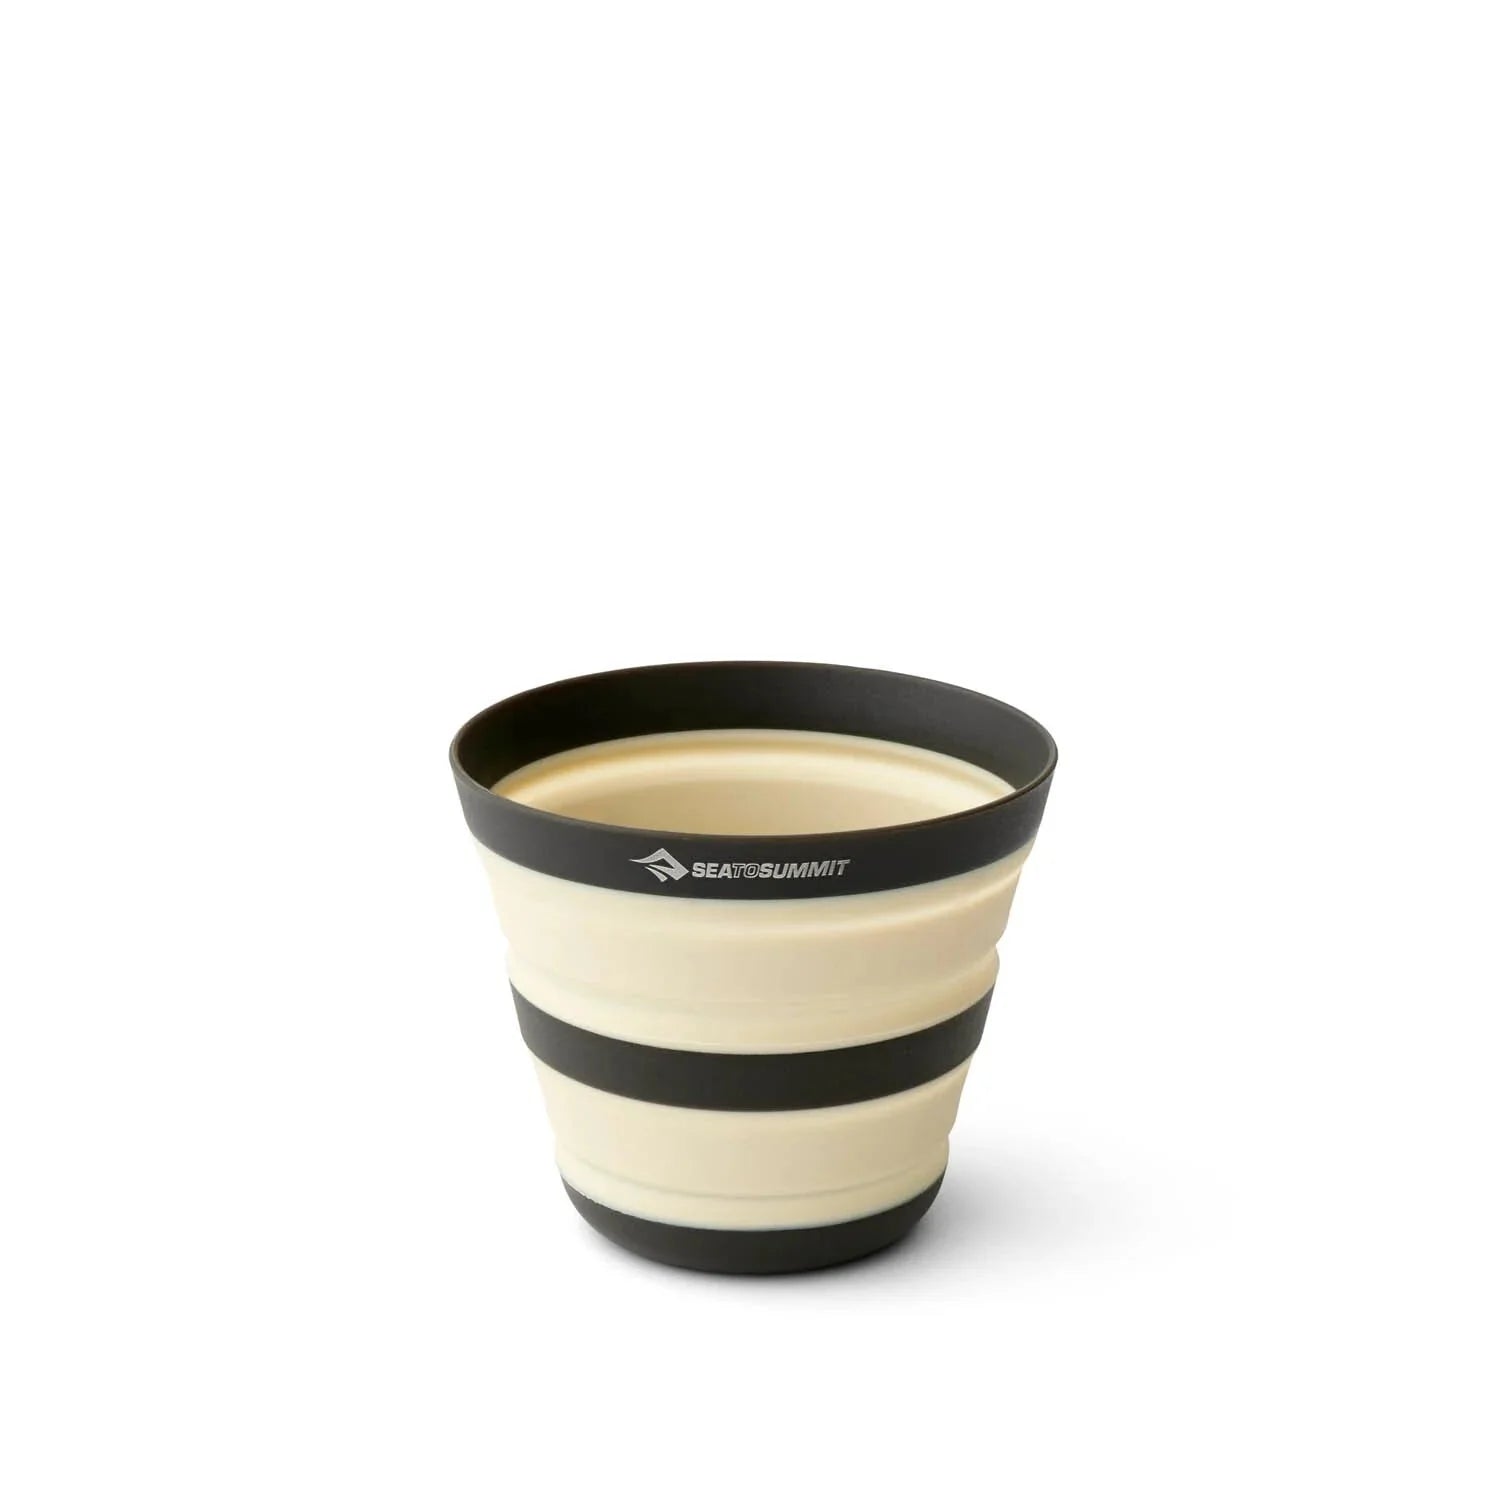 Sea to Summit Frontier Ultralight Collapsible Cup shown open in the Bone White color.